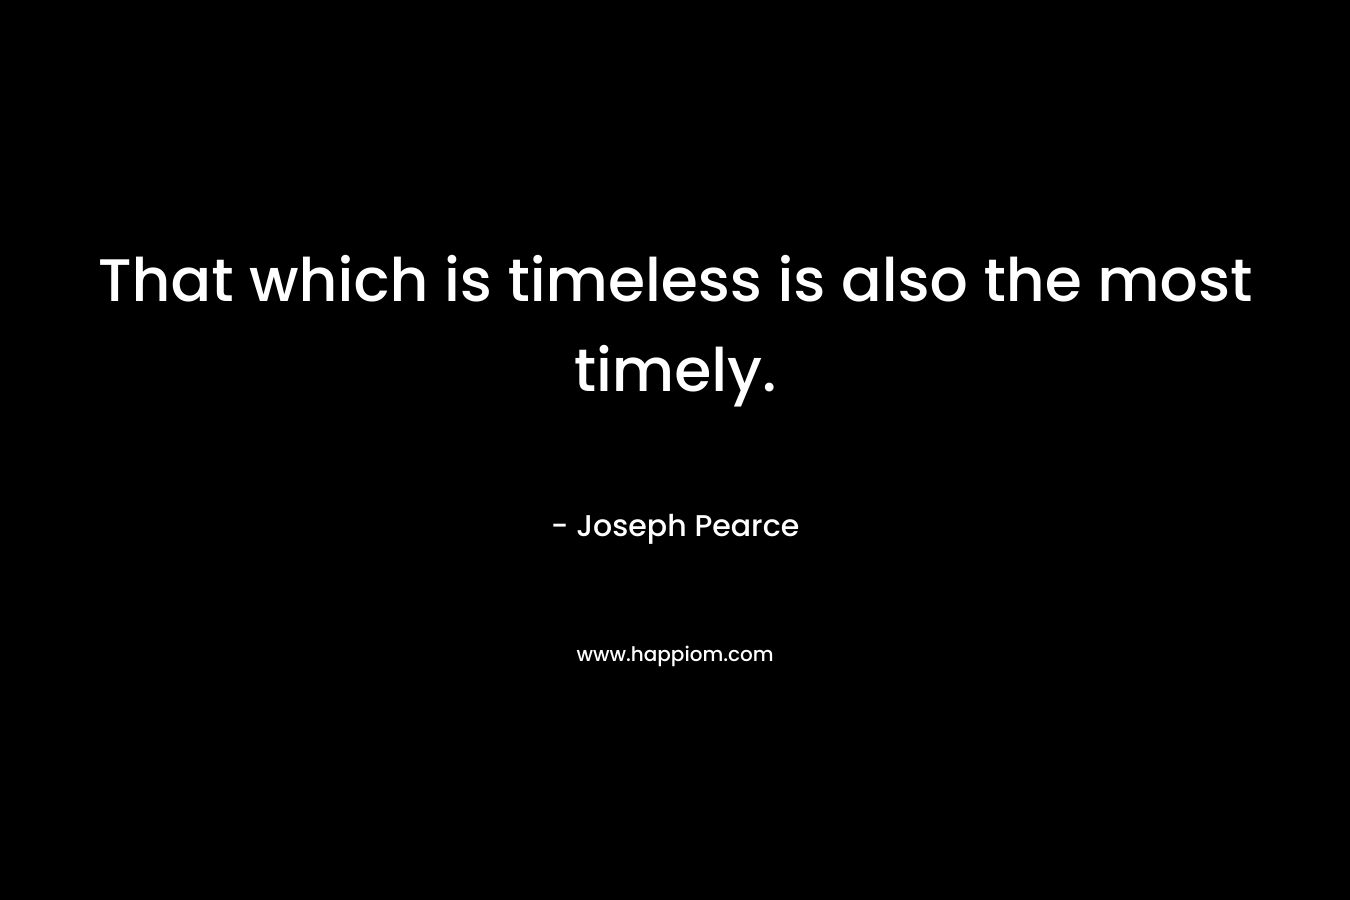 That which is timeless is also the most timely.